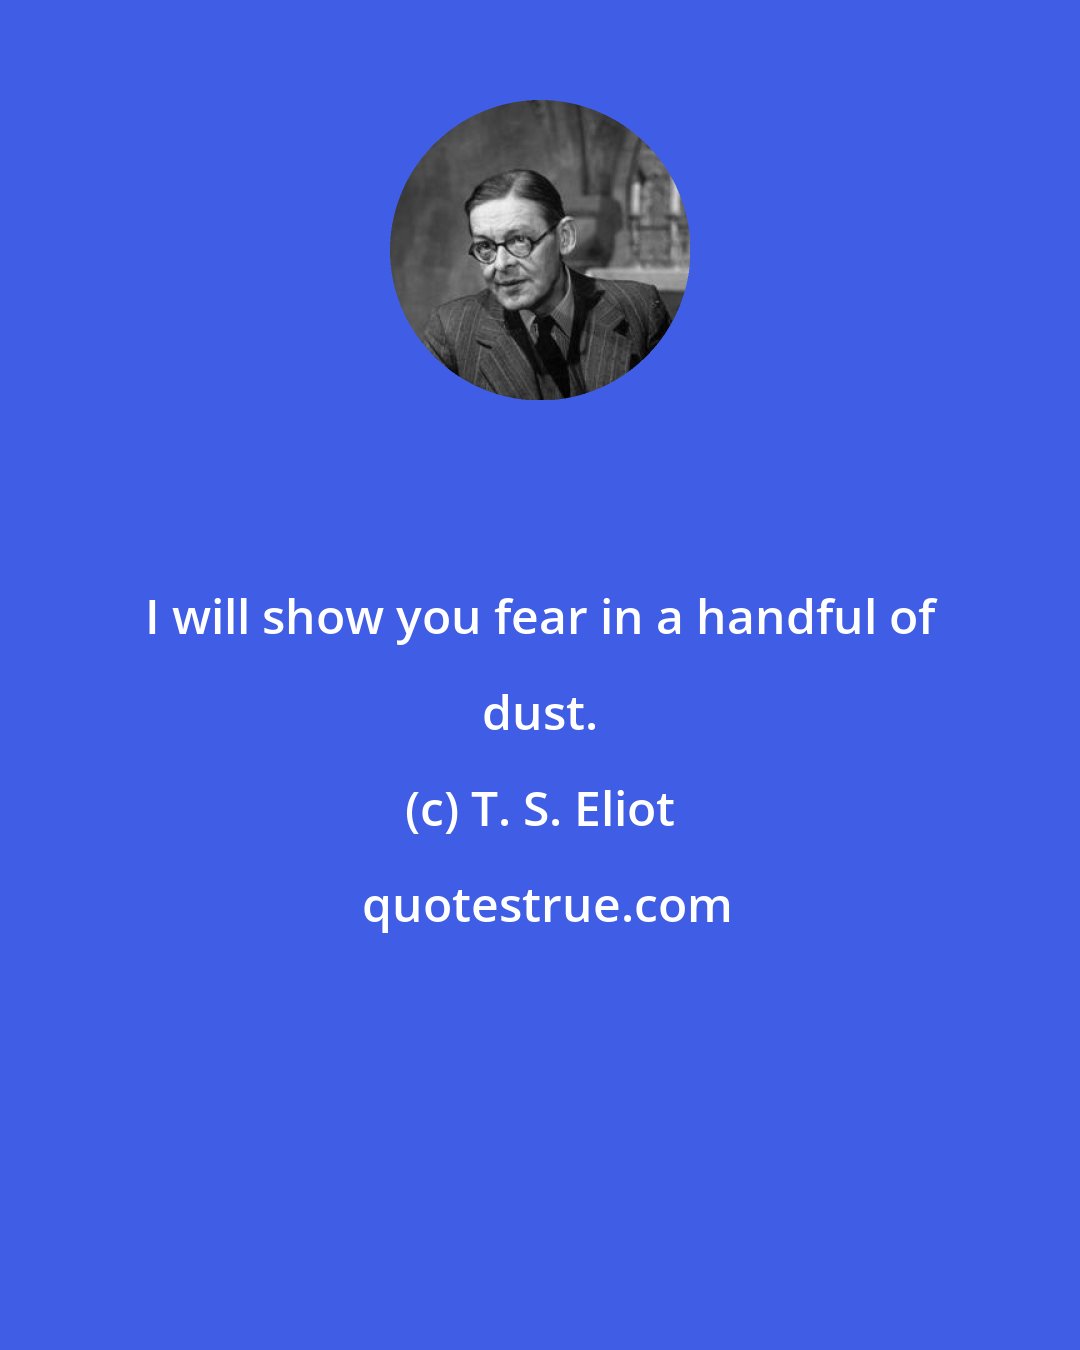 T. S. Eliot: I will show you fear in a handful of dust.